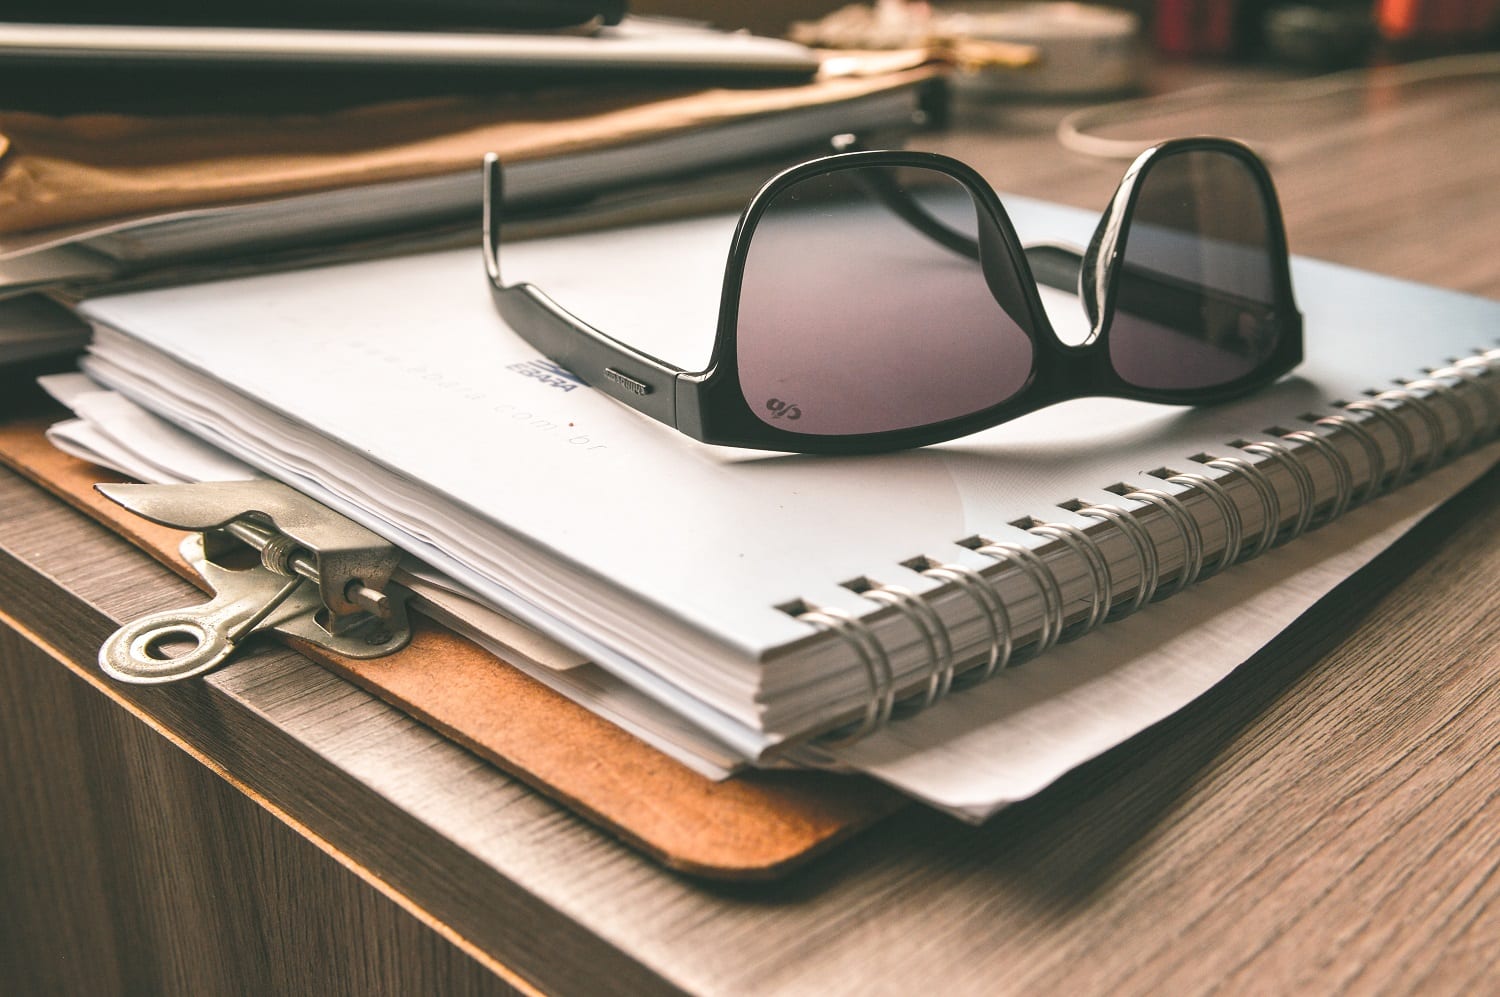 Notebook and sunglasses